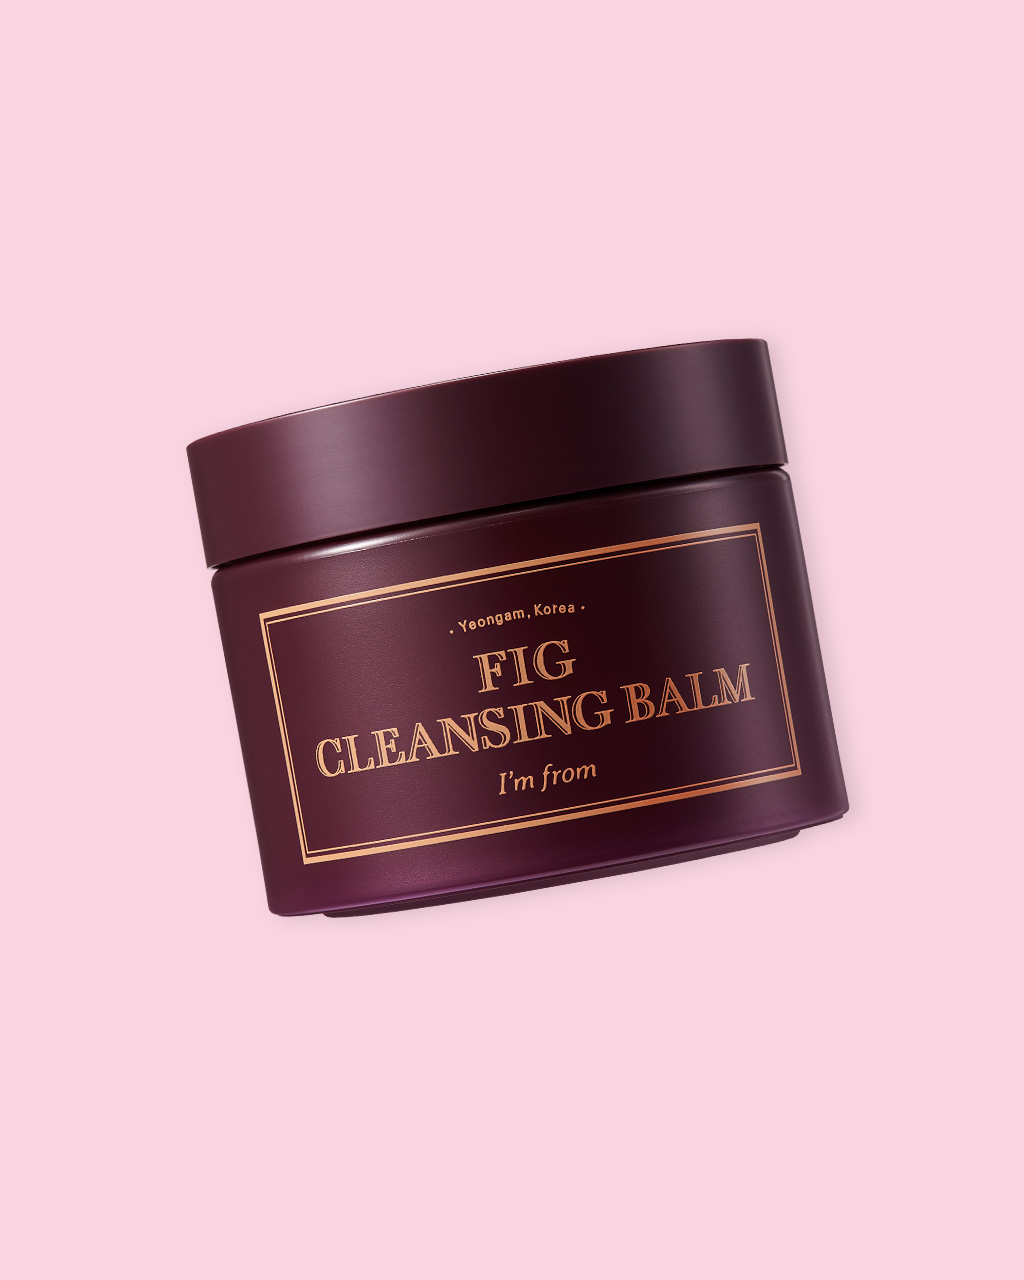 Soko-Glam-PDP-Im-From-Fig-Cleansing-Balm-skin-care-korean